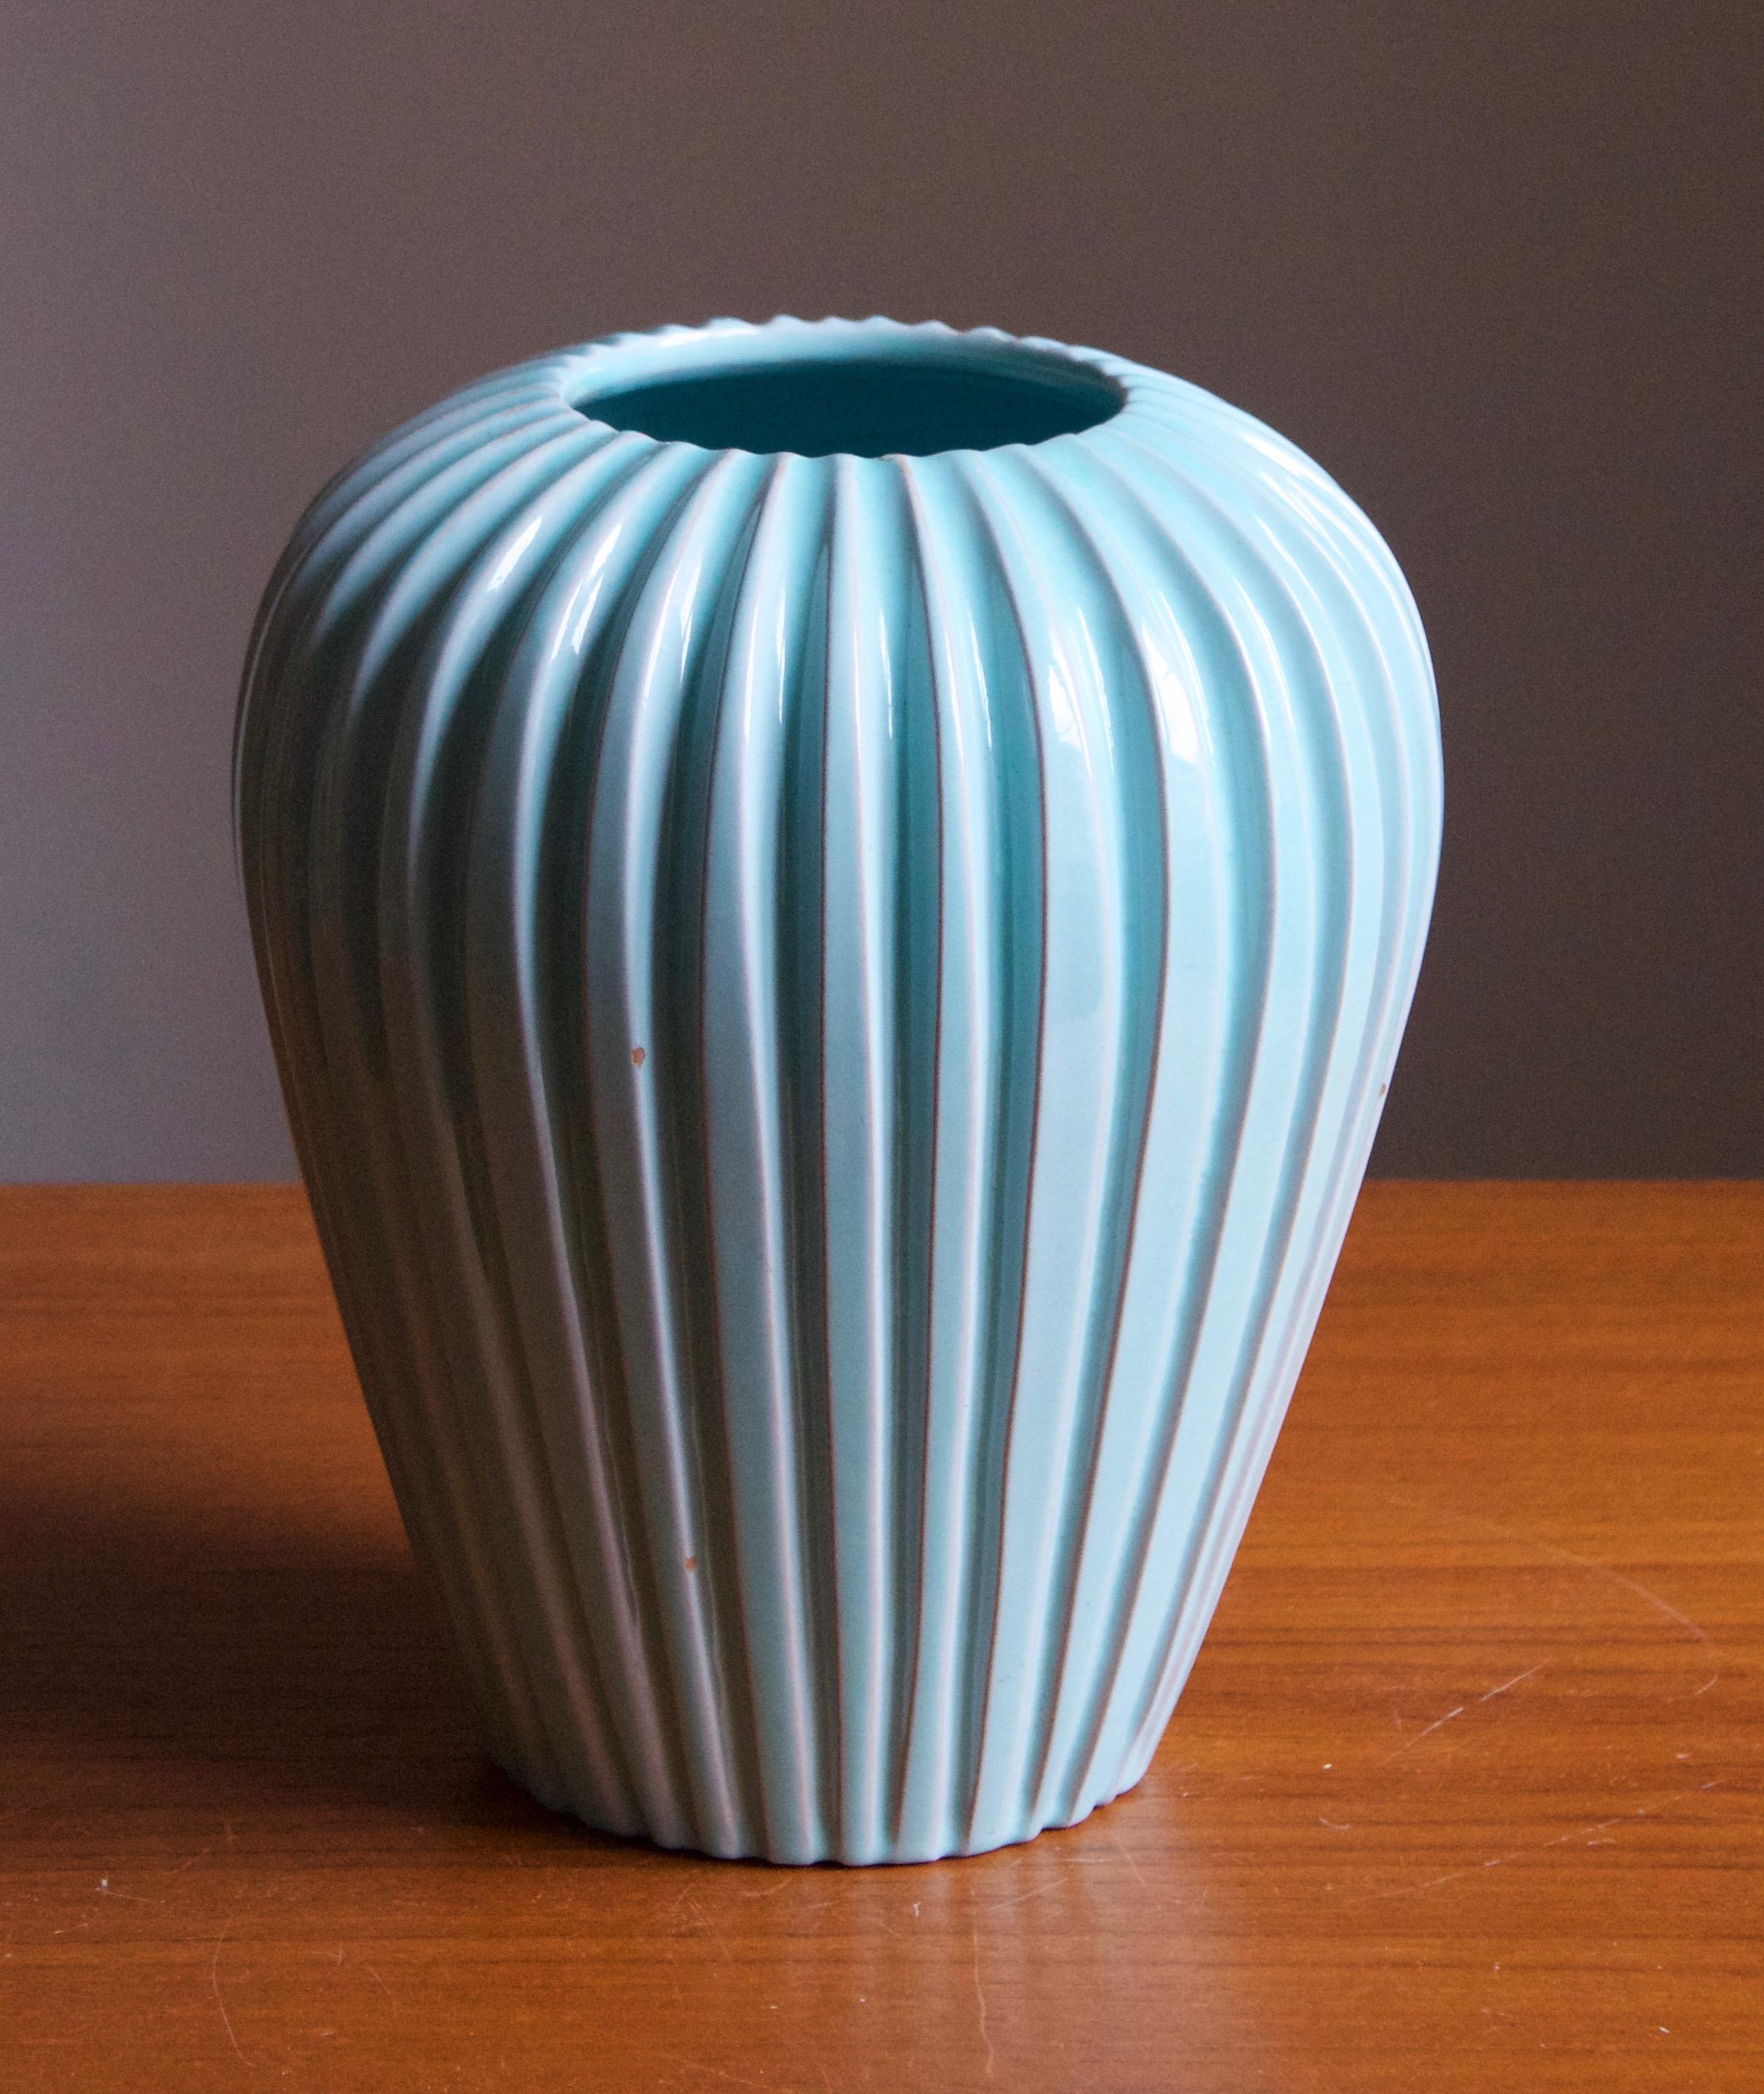 A fluted vase by Eslau Keramik. In blue-glazed stoneware. Designed and produced 1950s.